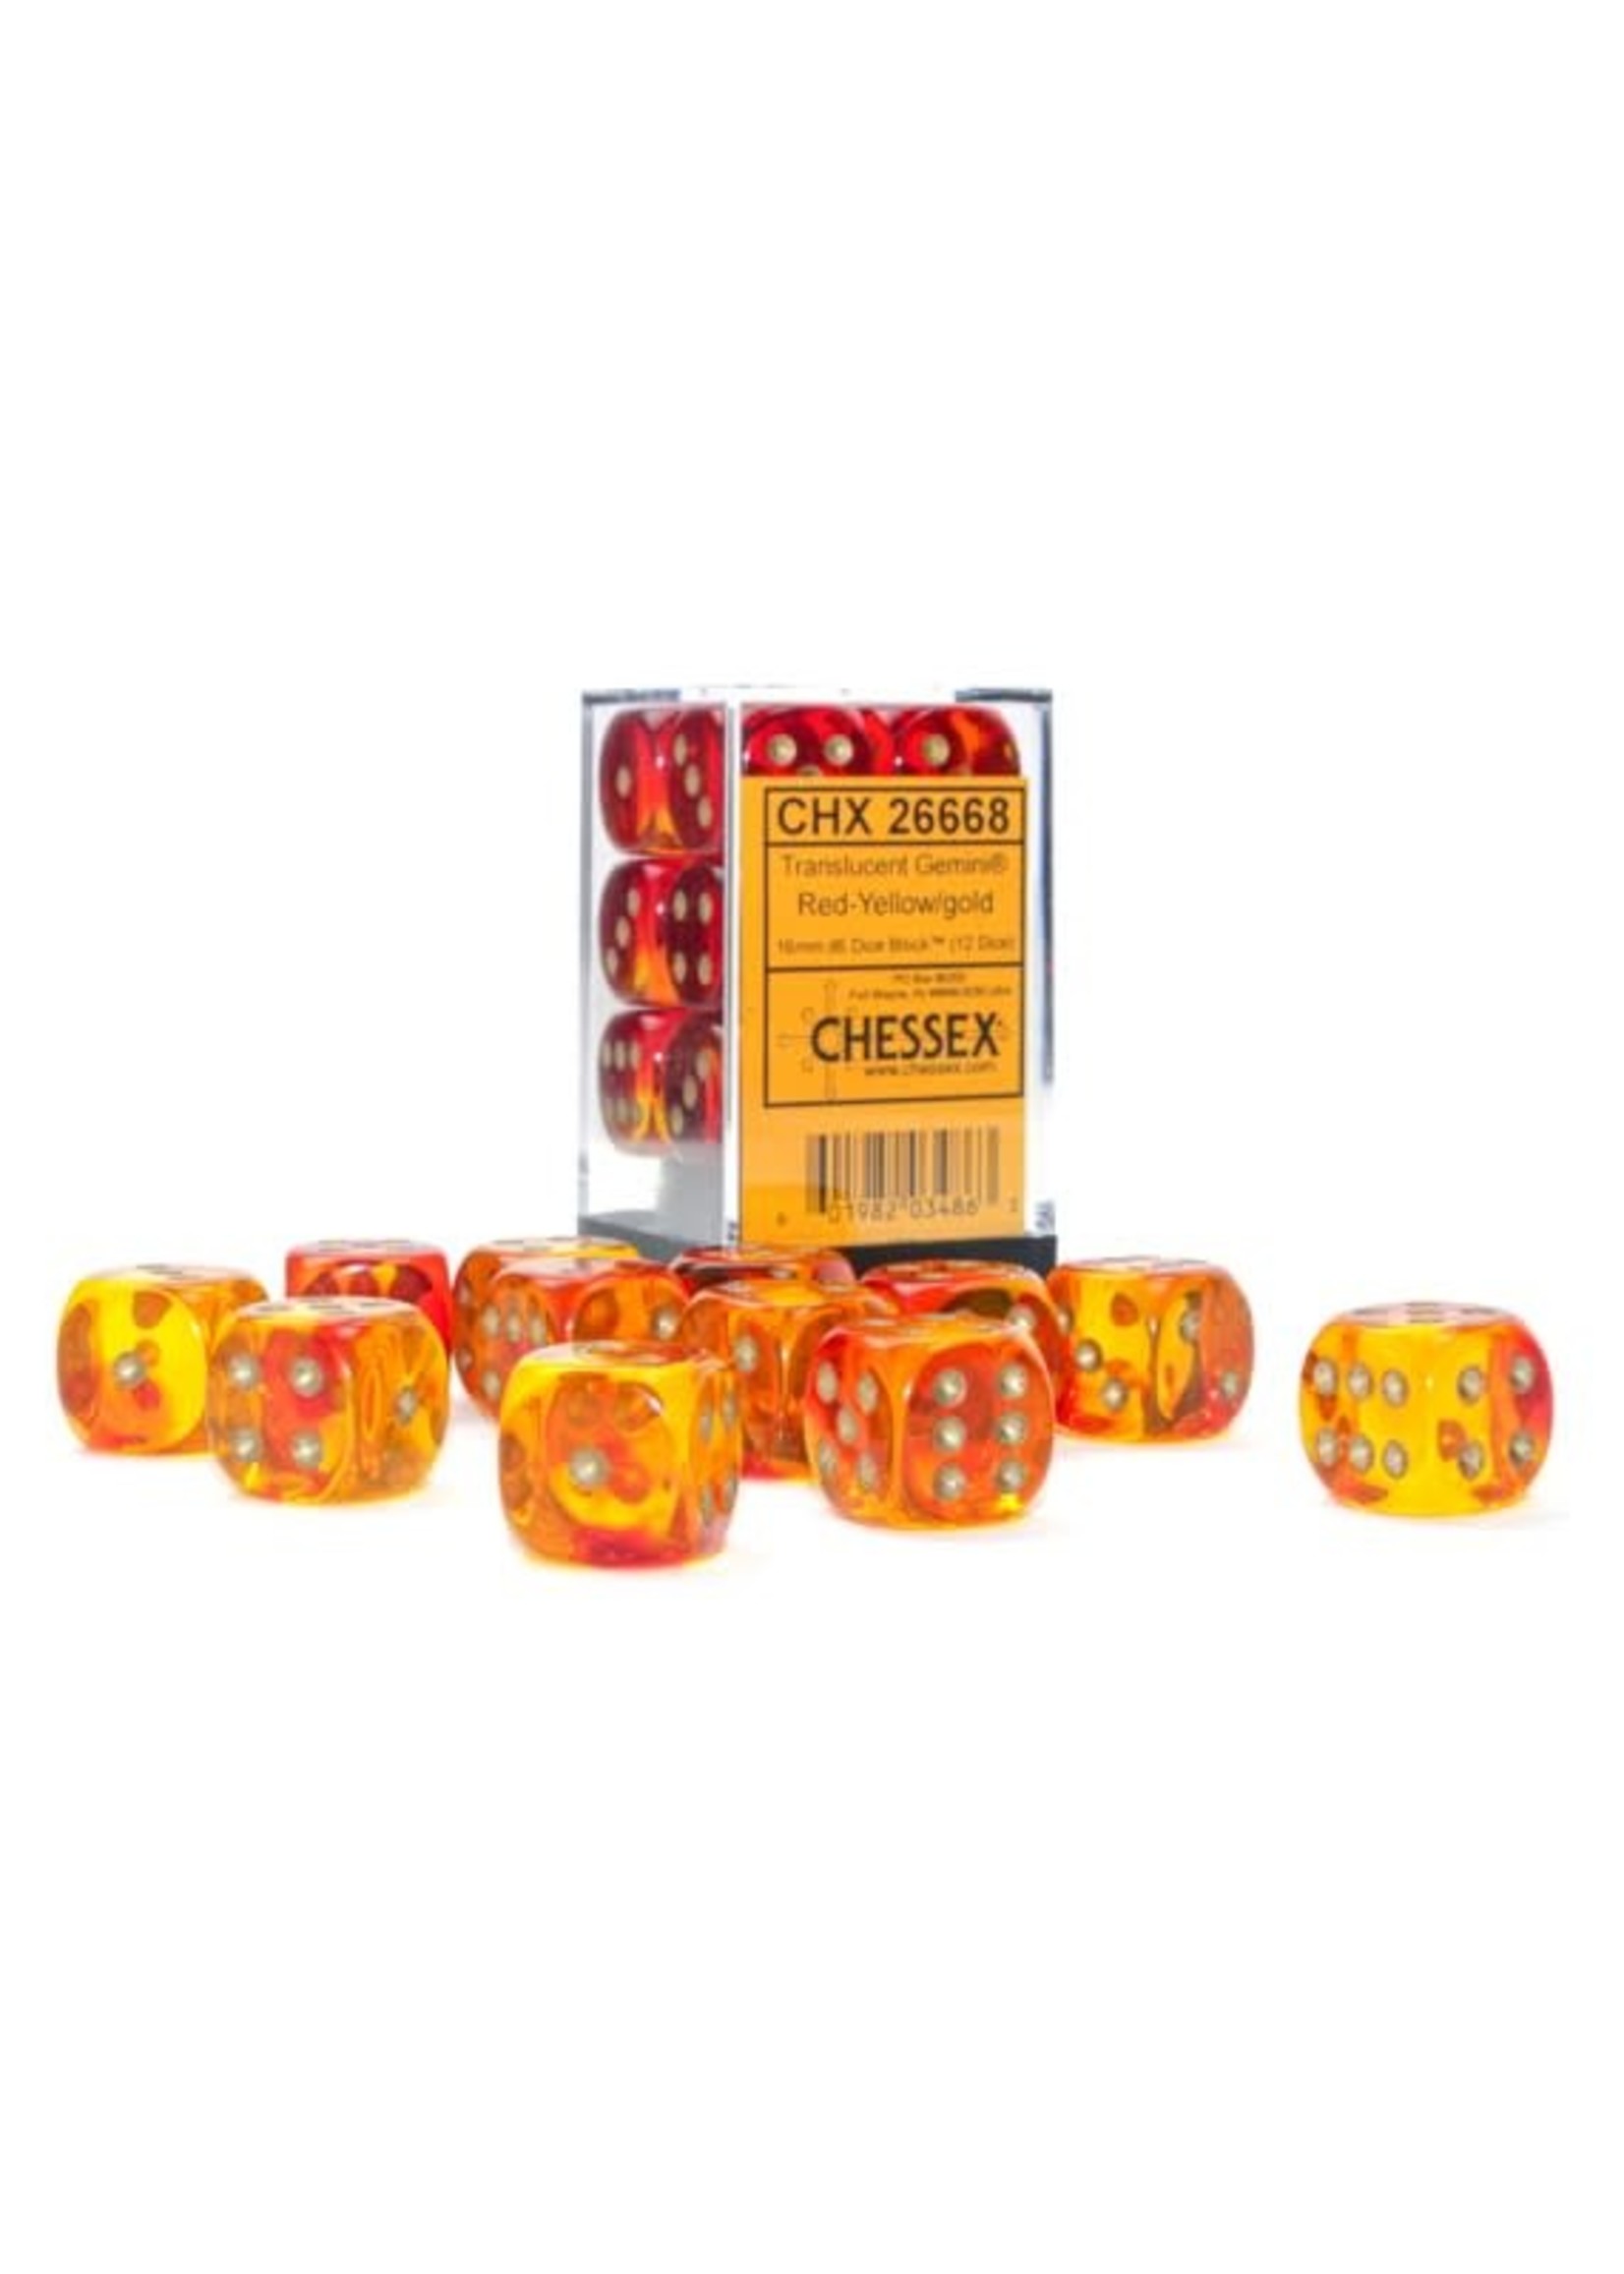 Chessex d6 Cube 16mm Gemini Translucent Red & Yellow w/ gold (12)